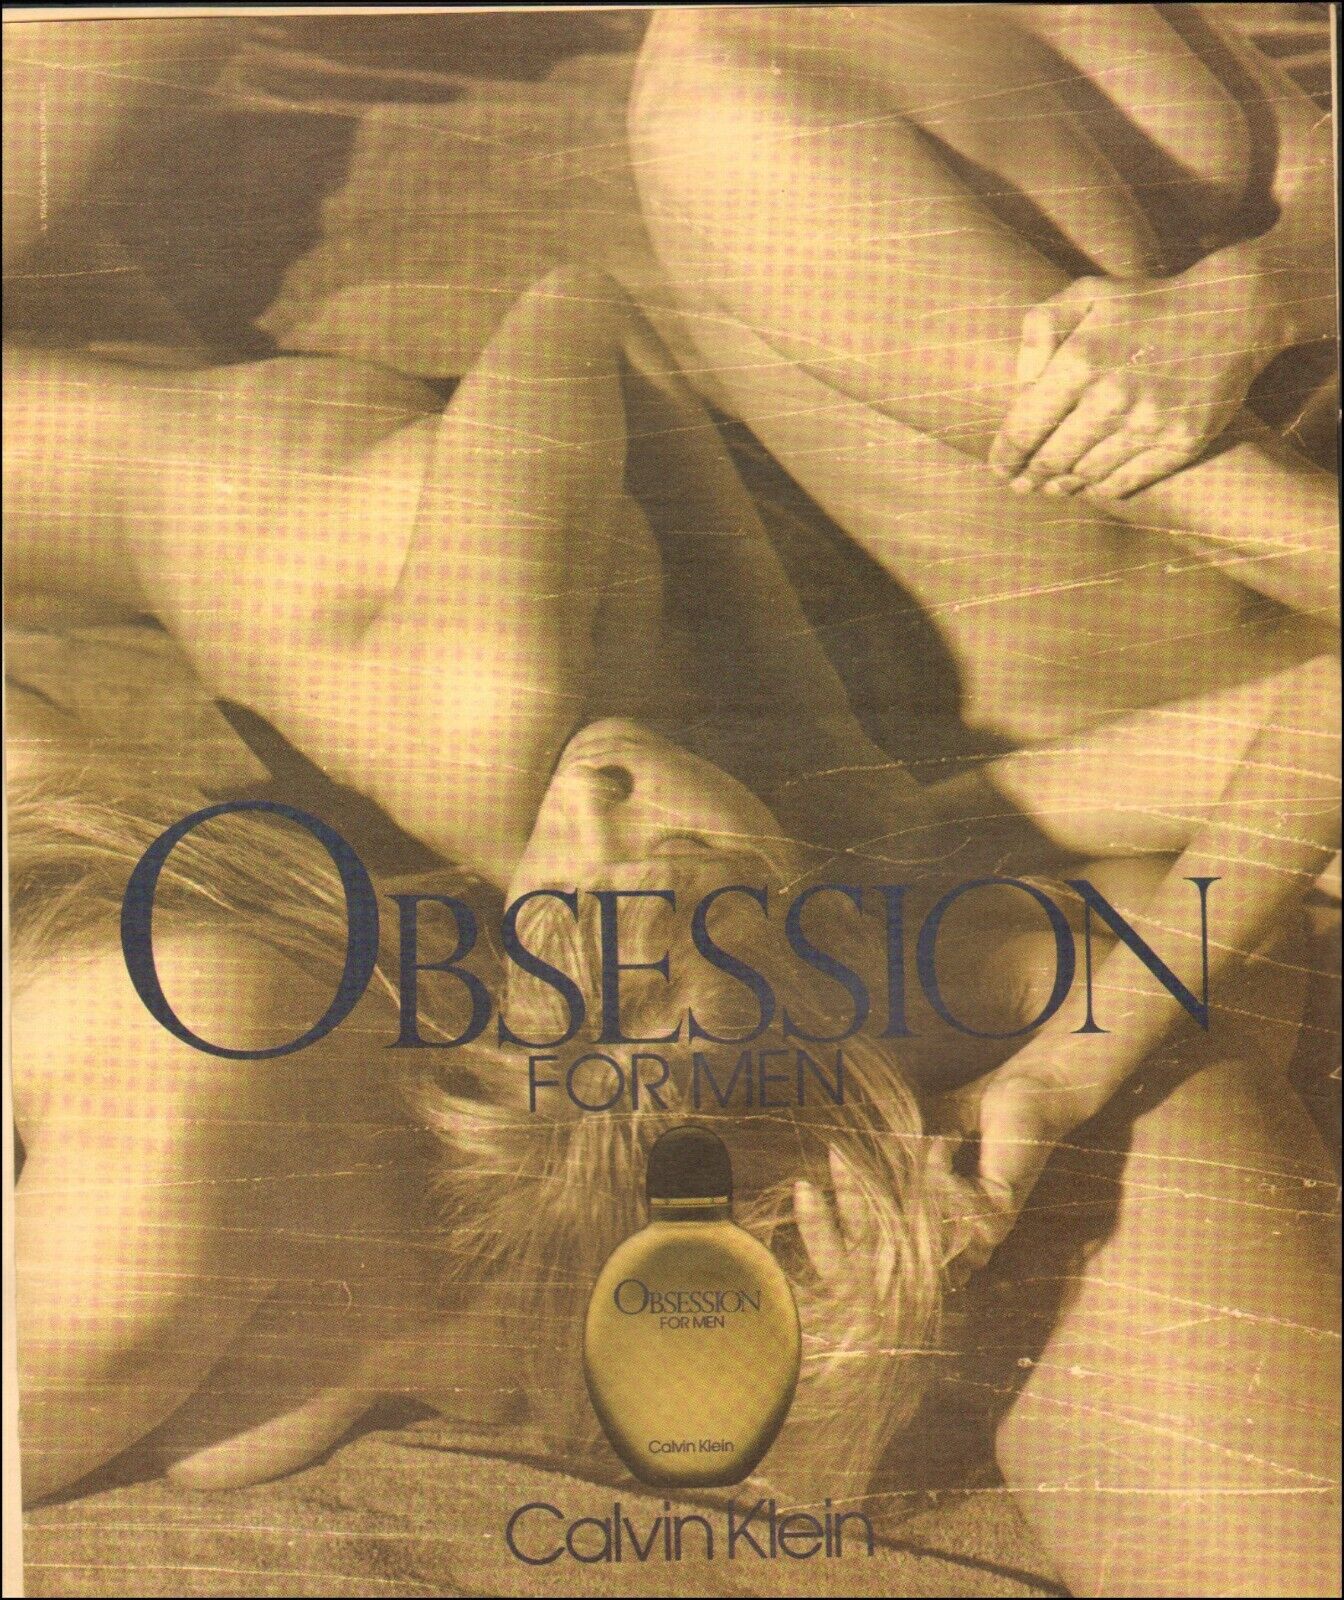 1988 Print Ad/Vintage Obession for Men Calvin Klein Nudes NOT PRODUCT  04/28/22